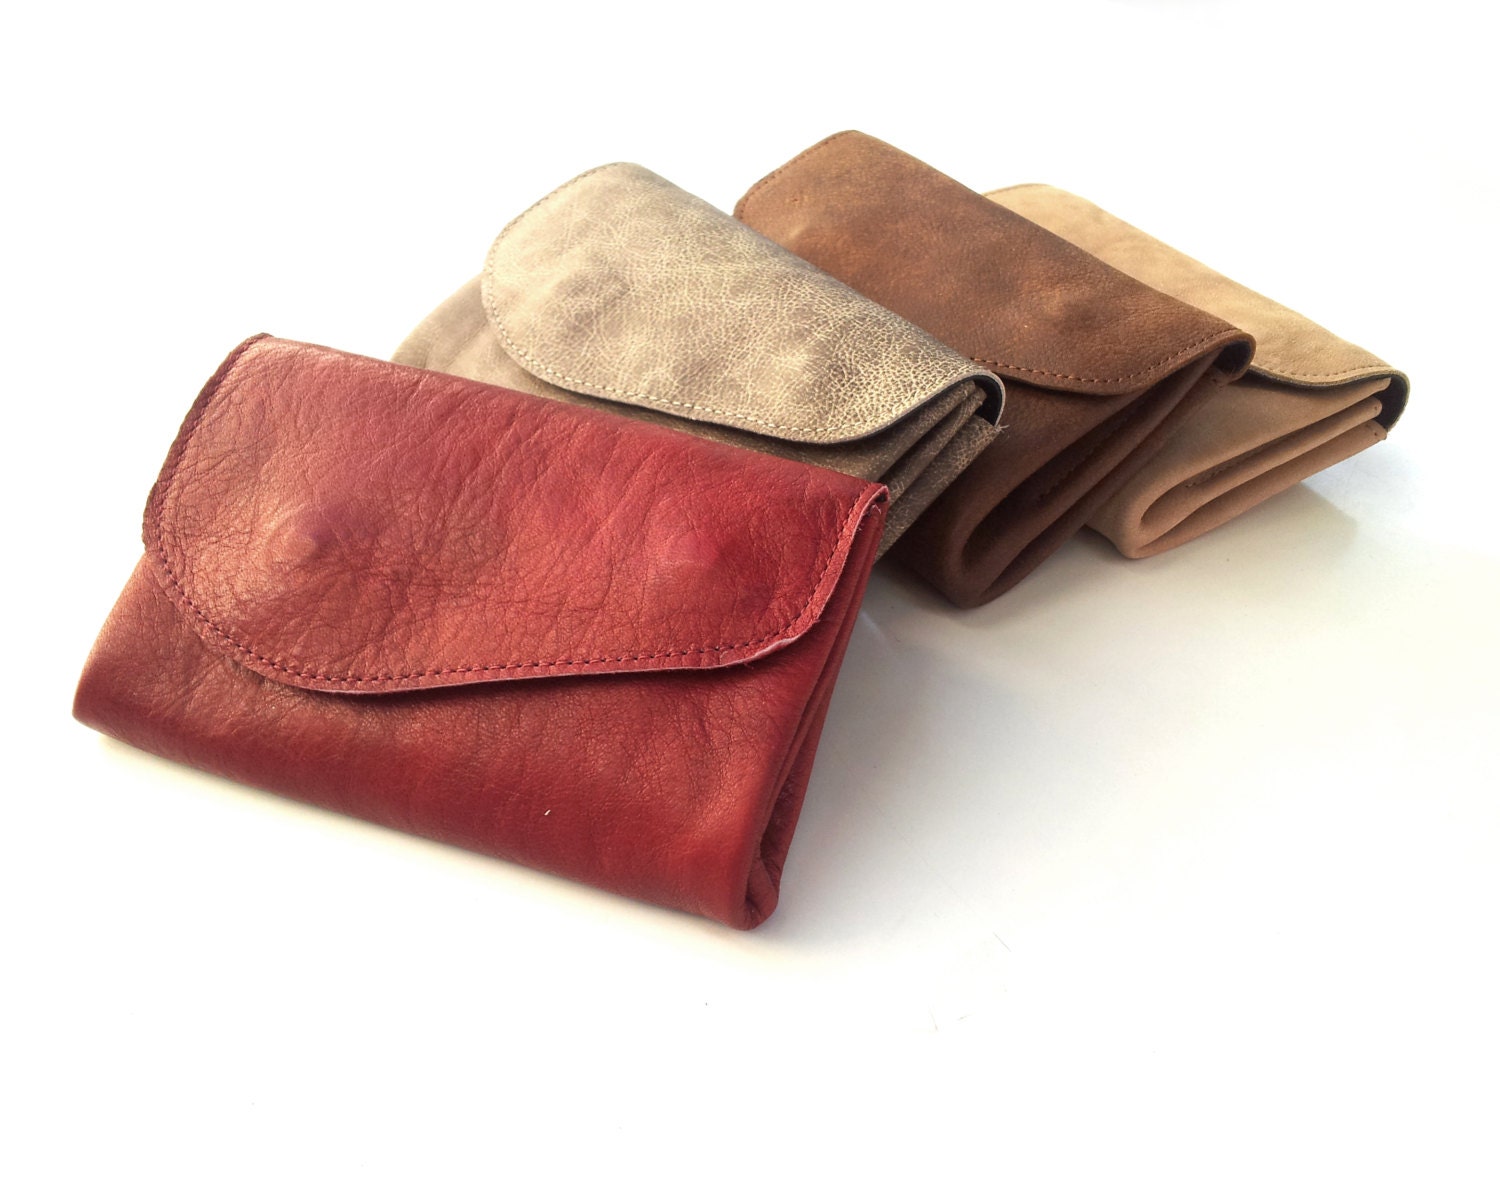 Nude wallet, Women leather purse, leather clutch, coins wallet - TahelSadot